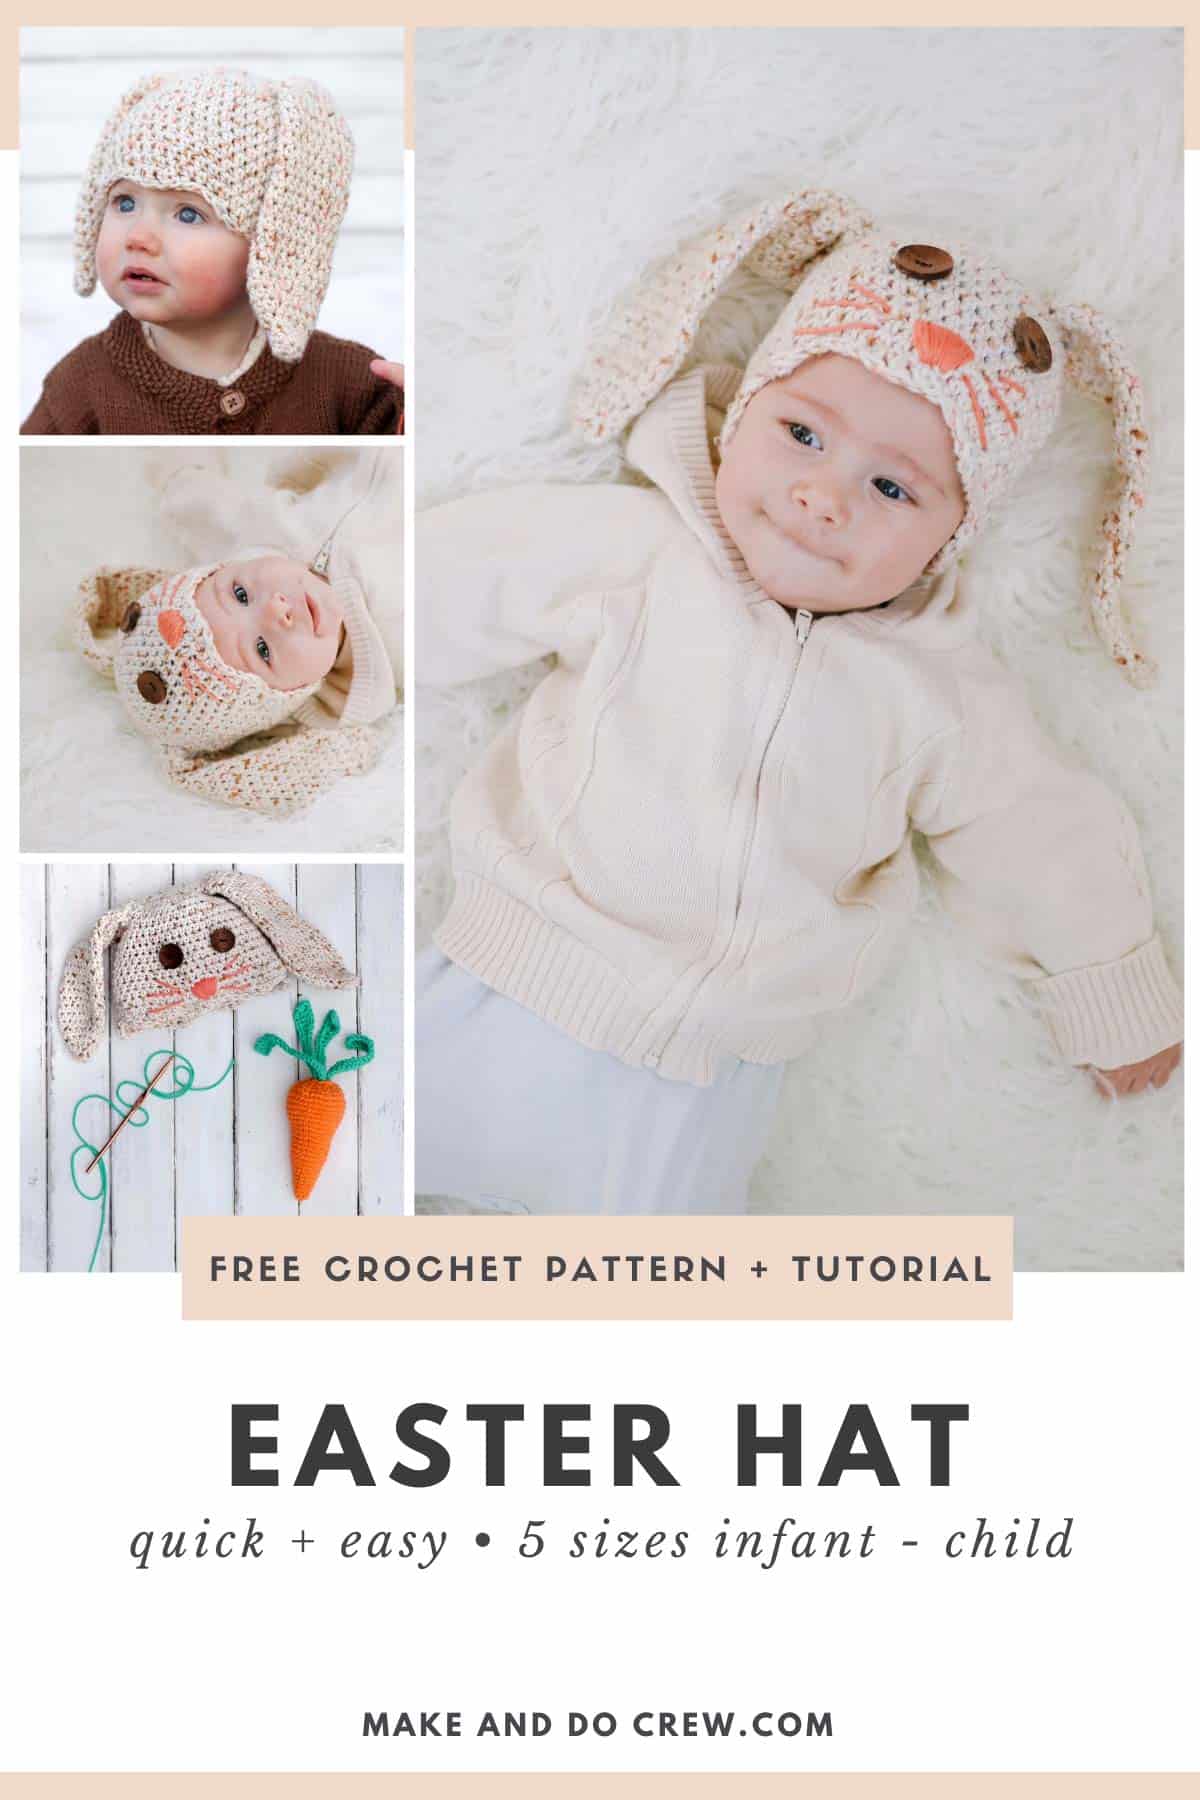 A grid of photos of babies wearing a modern crochet bunny hat pattern with floppy ears.